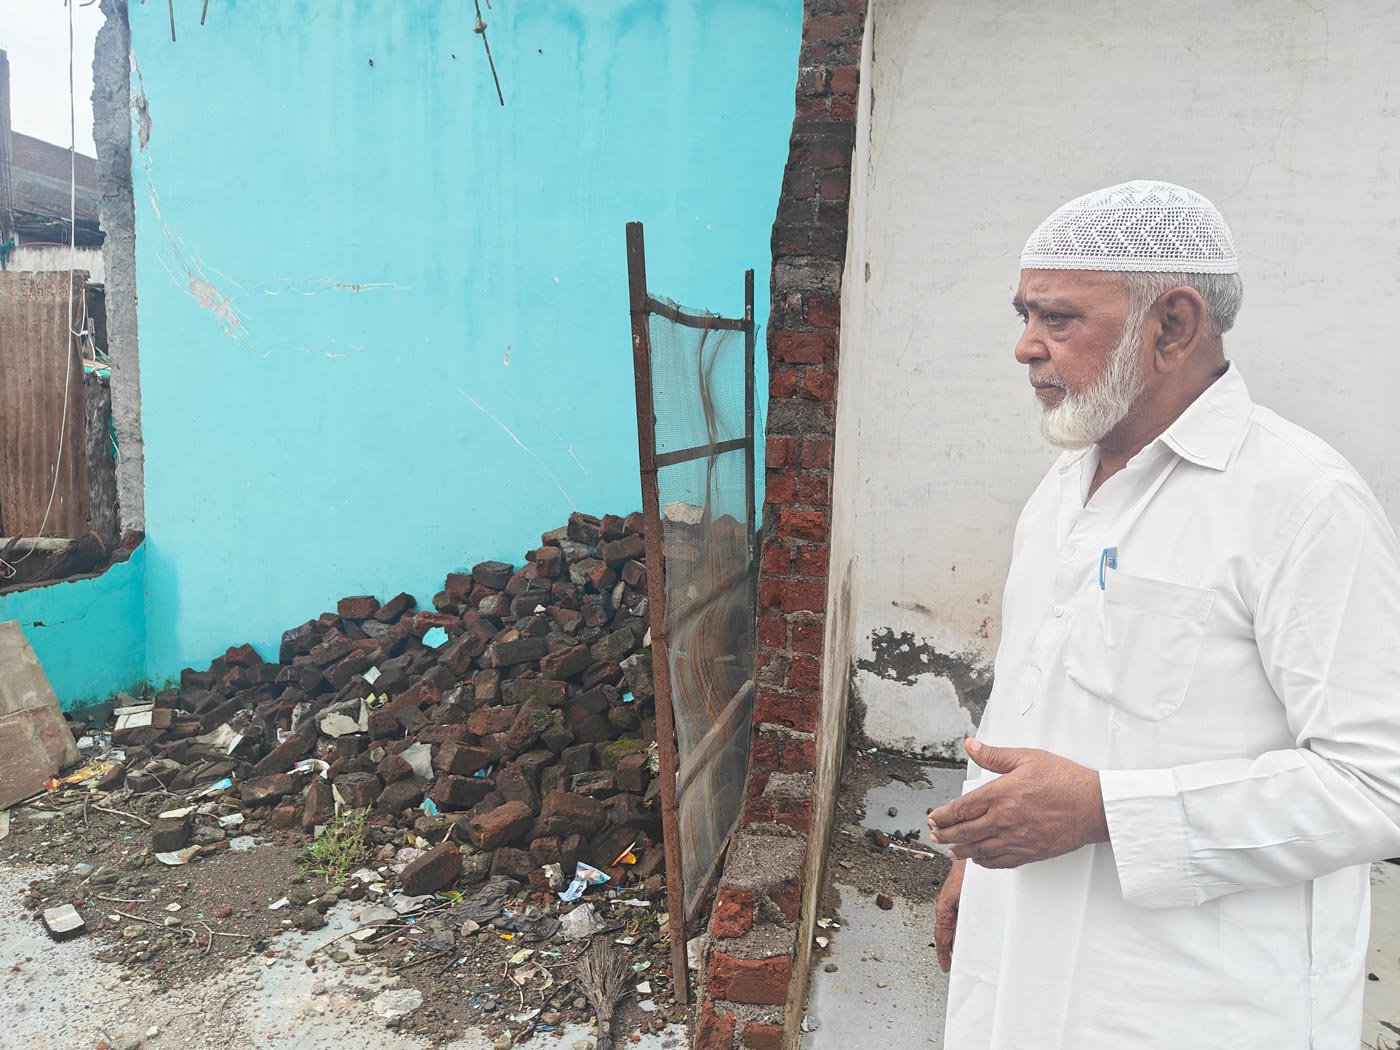 Mohammad Rafique surveying the damage done to his shop in Khargone’s Chandni Chowk by bulldozers